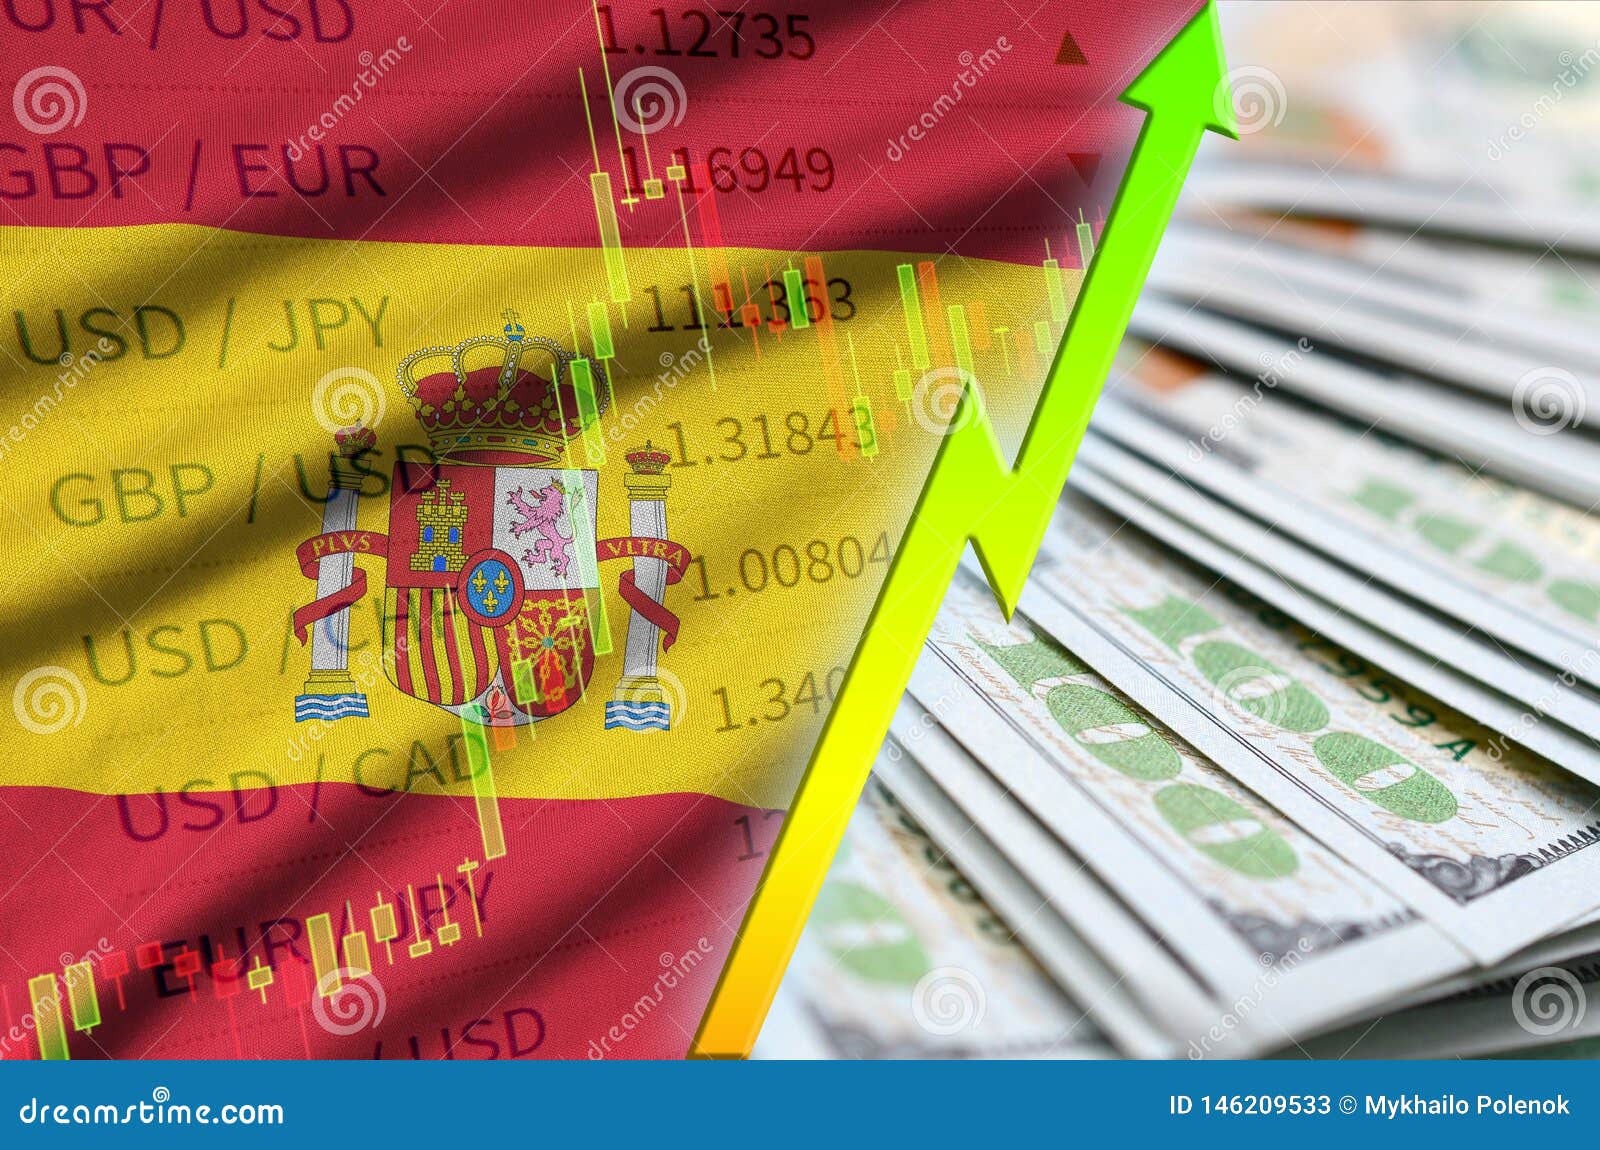 spain-flag-and-chart-growing-us-dollar-position-with-a-fan-of-dollar-bills-stock-illustration